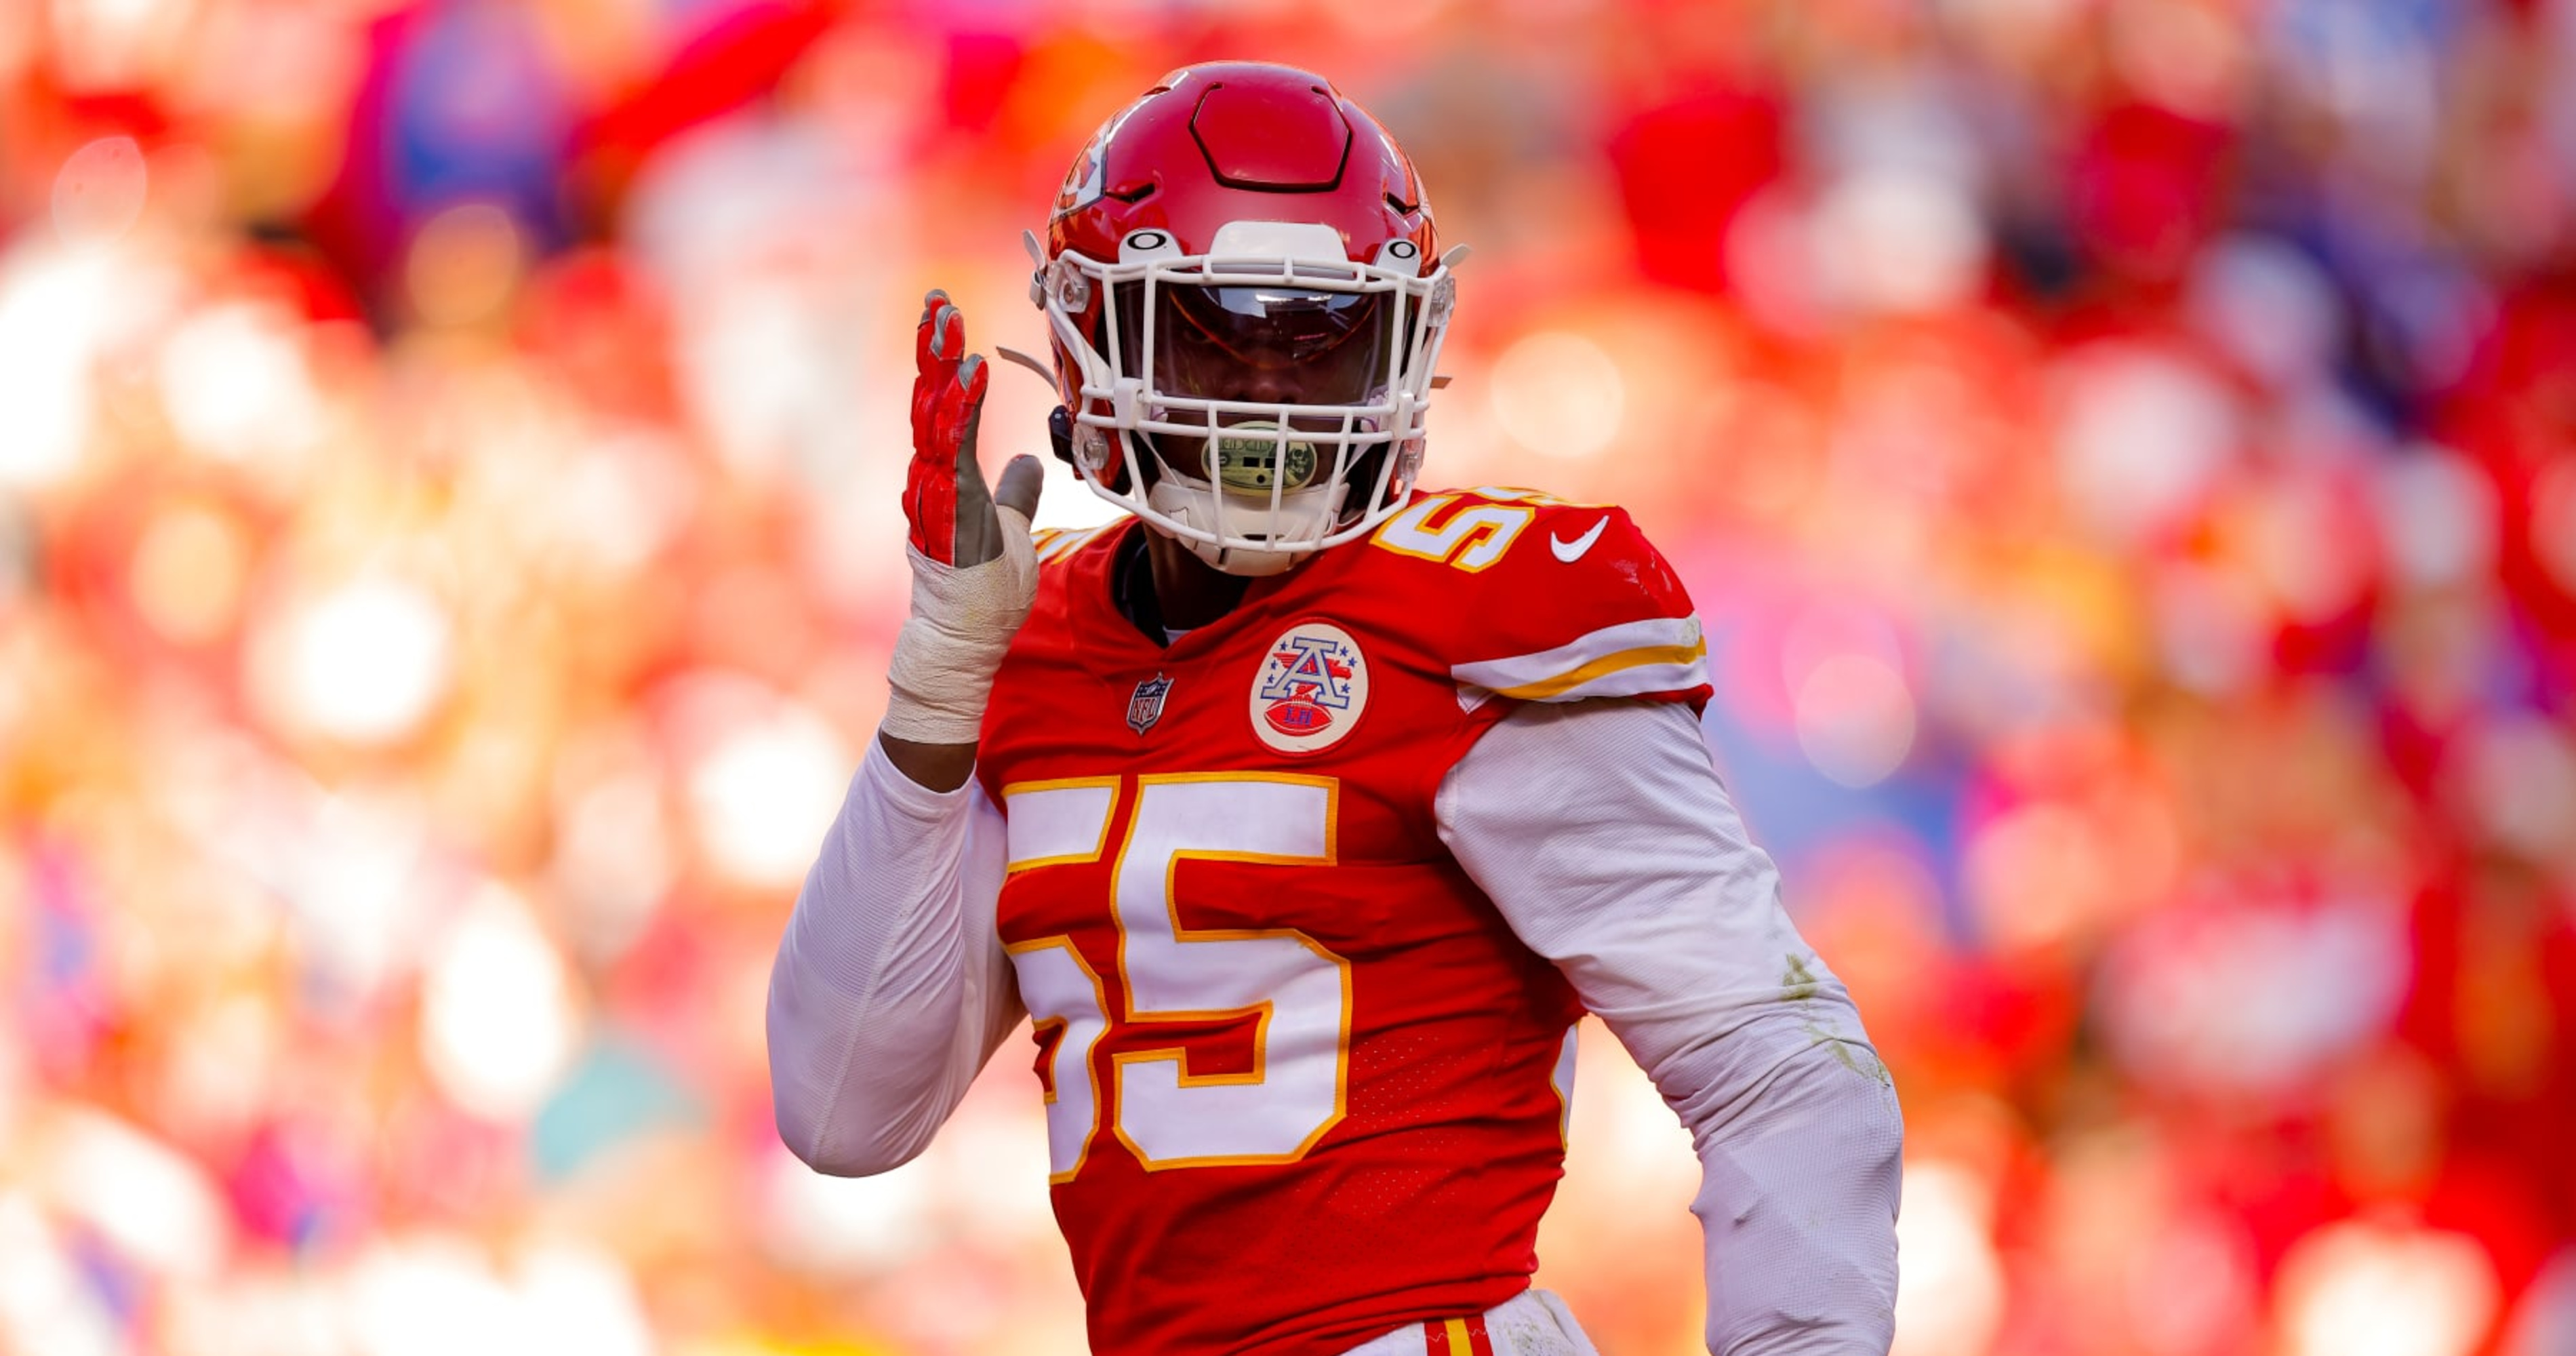 Chiefs' Frank Clark Suspended 2 Games for Violating Personal Conduct Policy